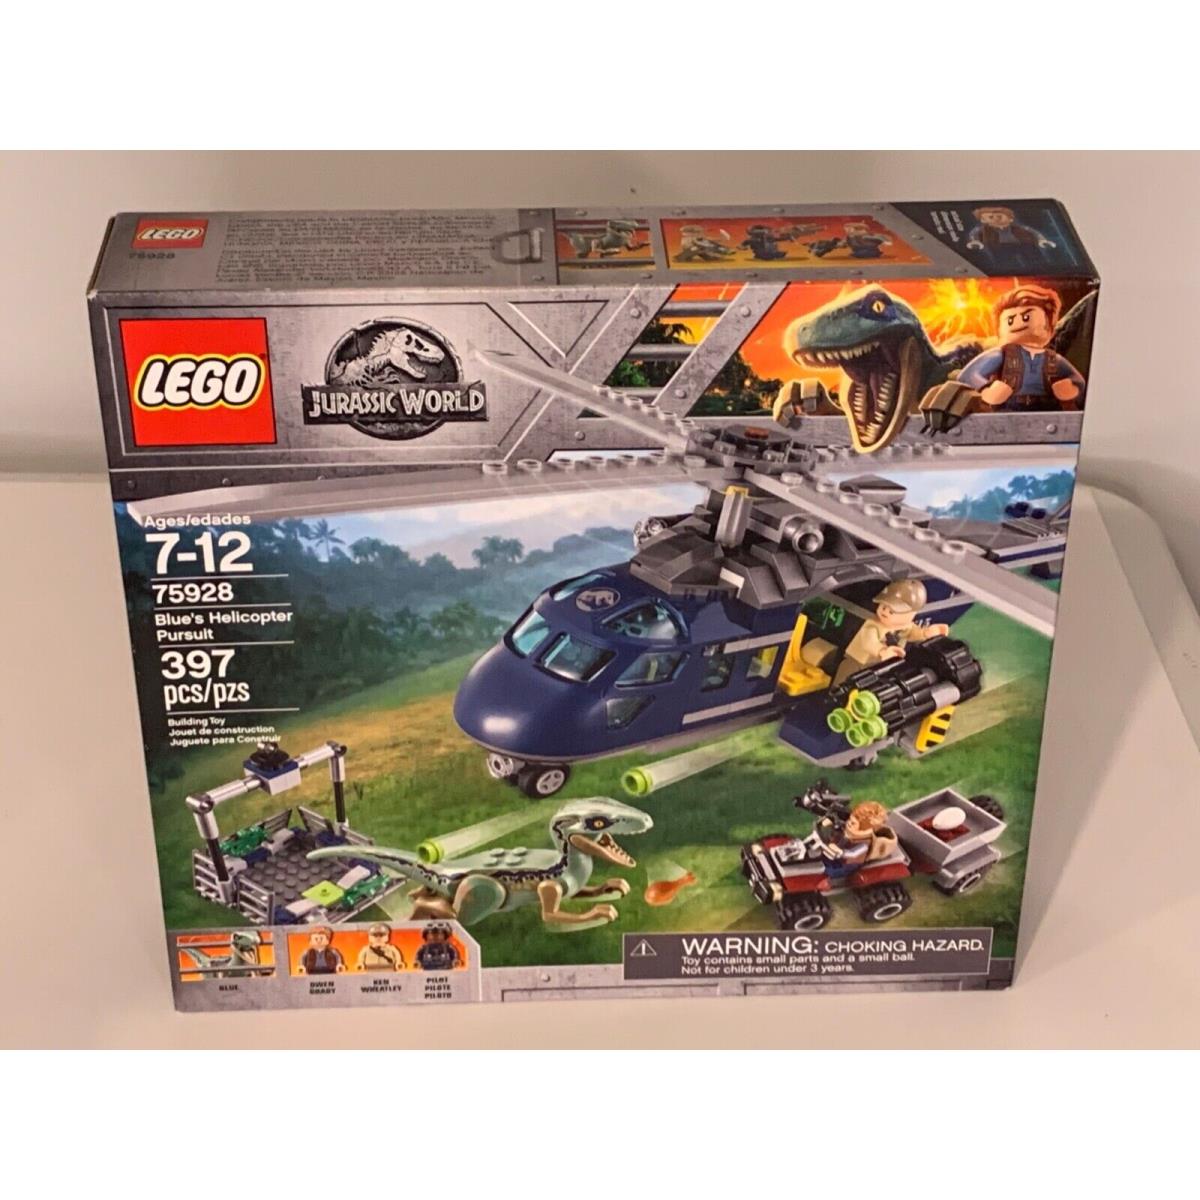 Lego Blue`s Helicopter Pursuit - Jurassic World 75928